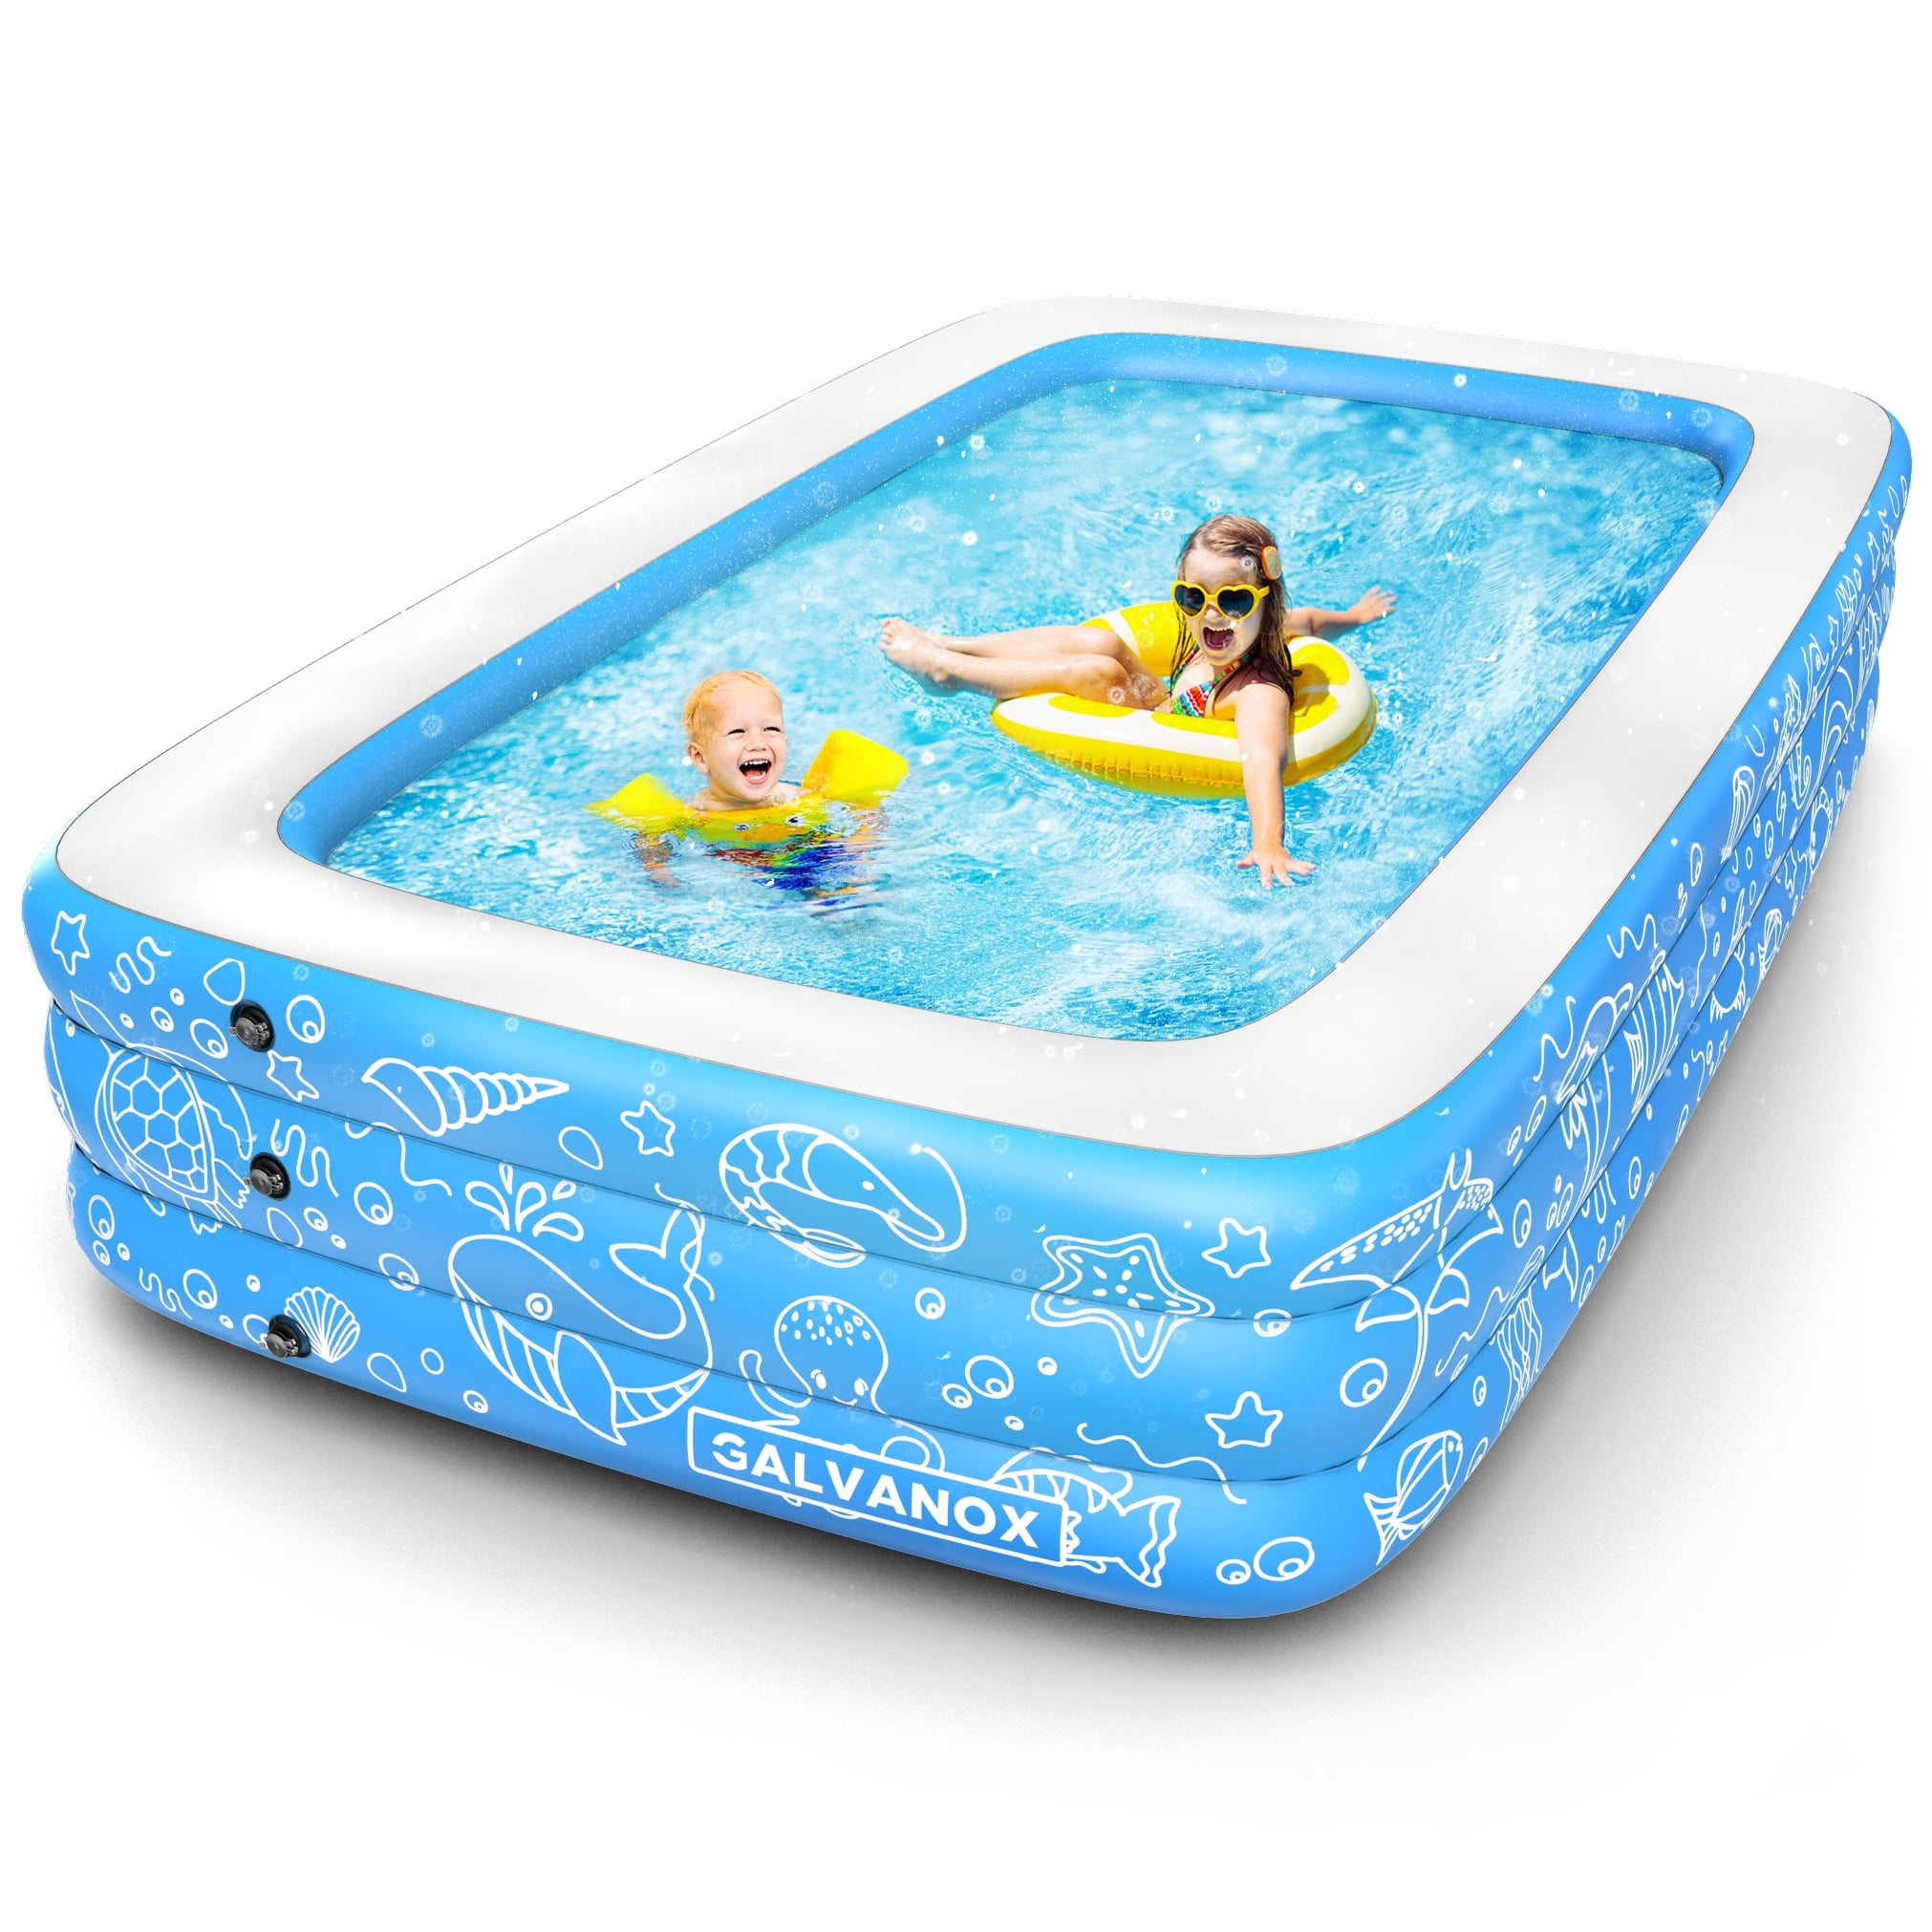 Inflatable Pool, Above Ground Swimming Pool for Kiddie/Kids/Adults/Family  22